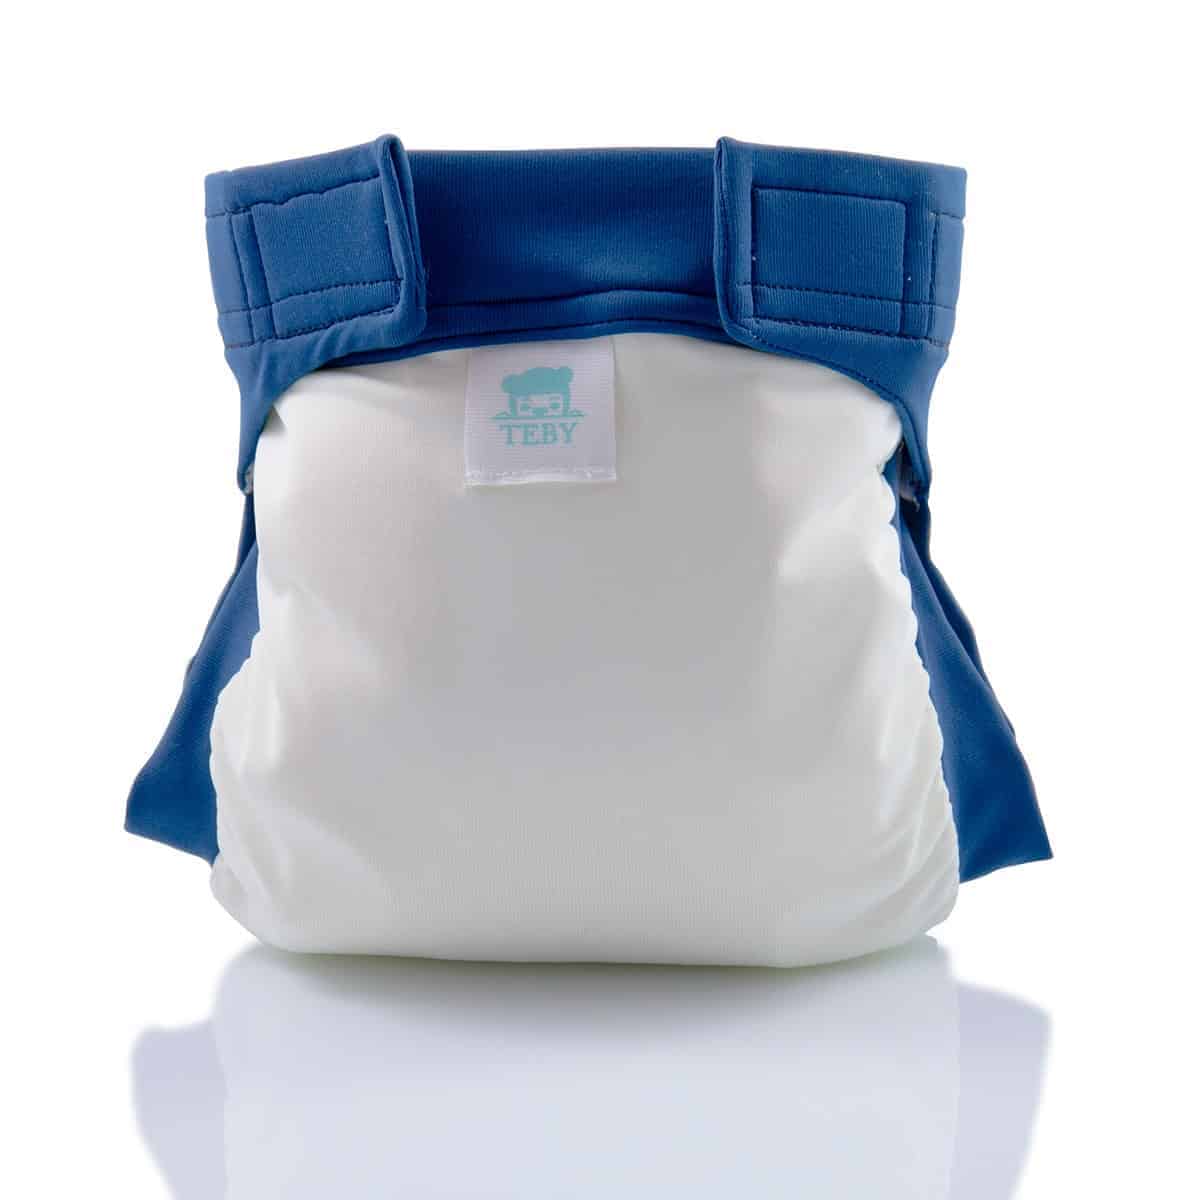 Soft Touch Pants - White and blue - Cloth Nappies